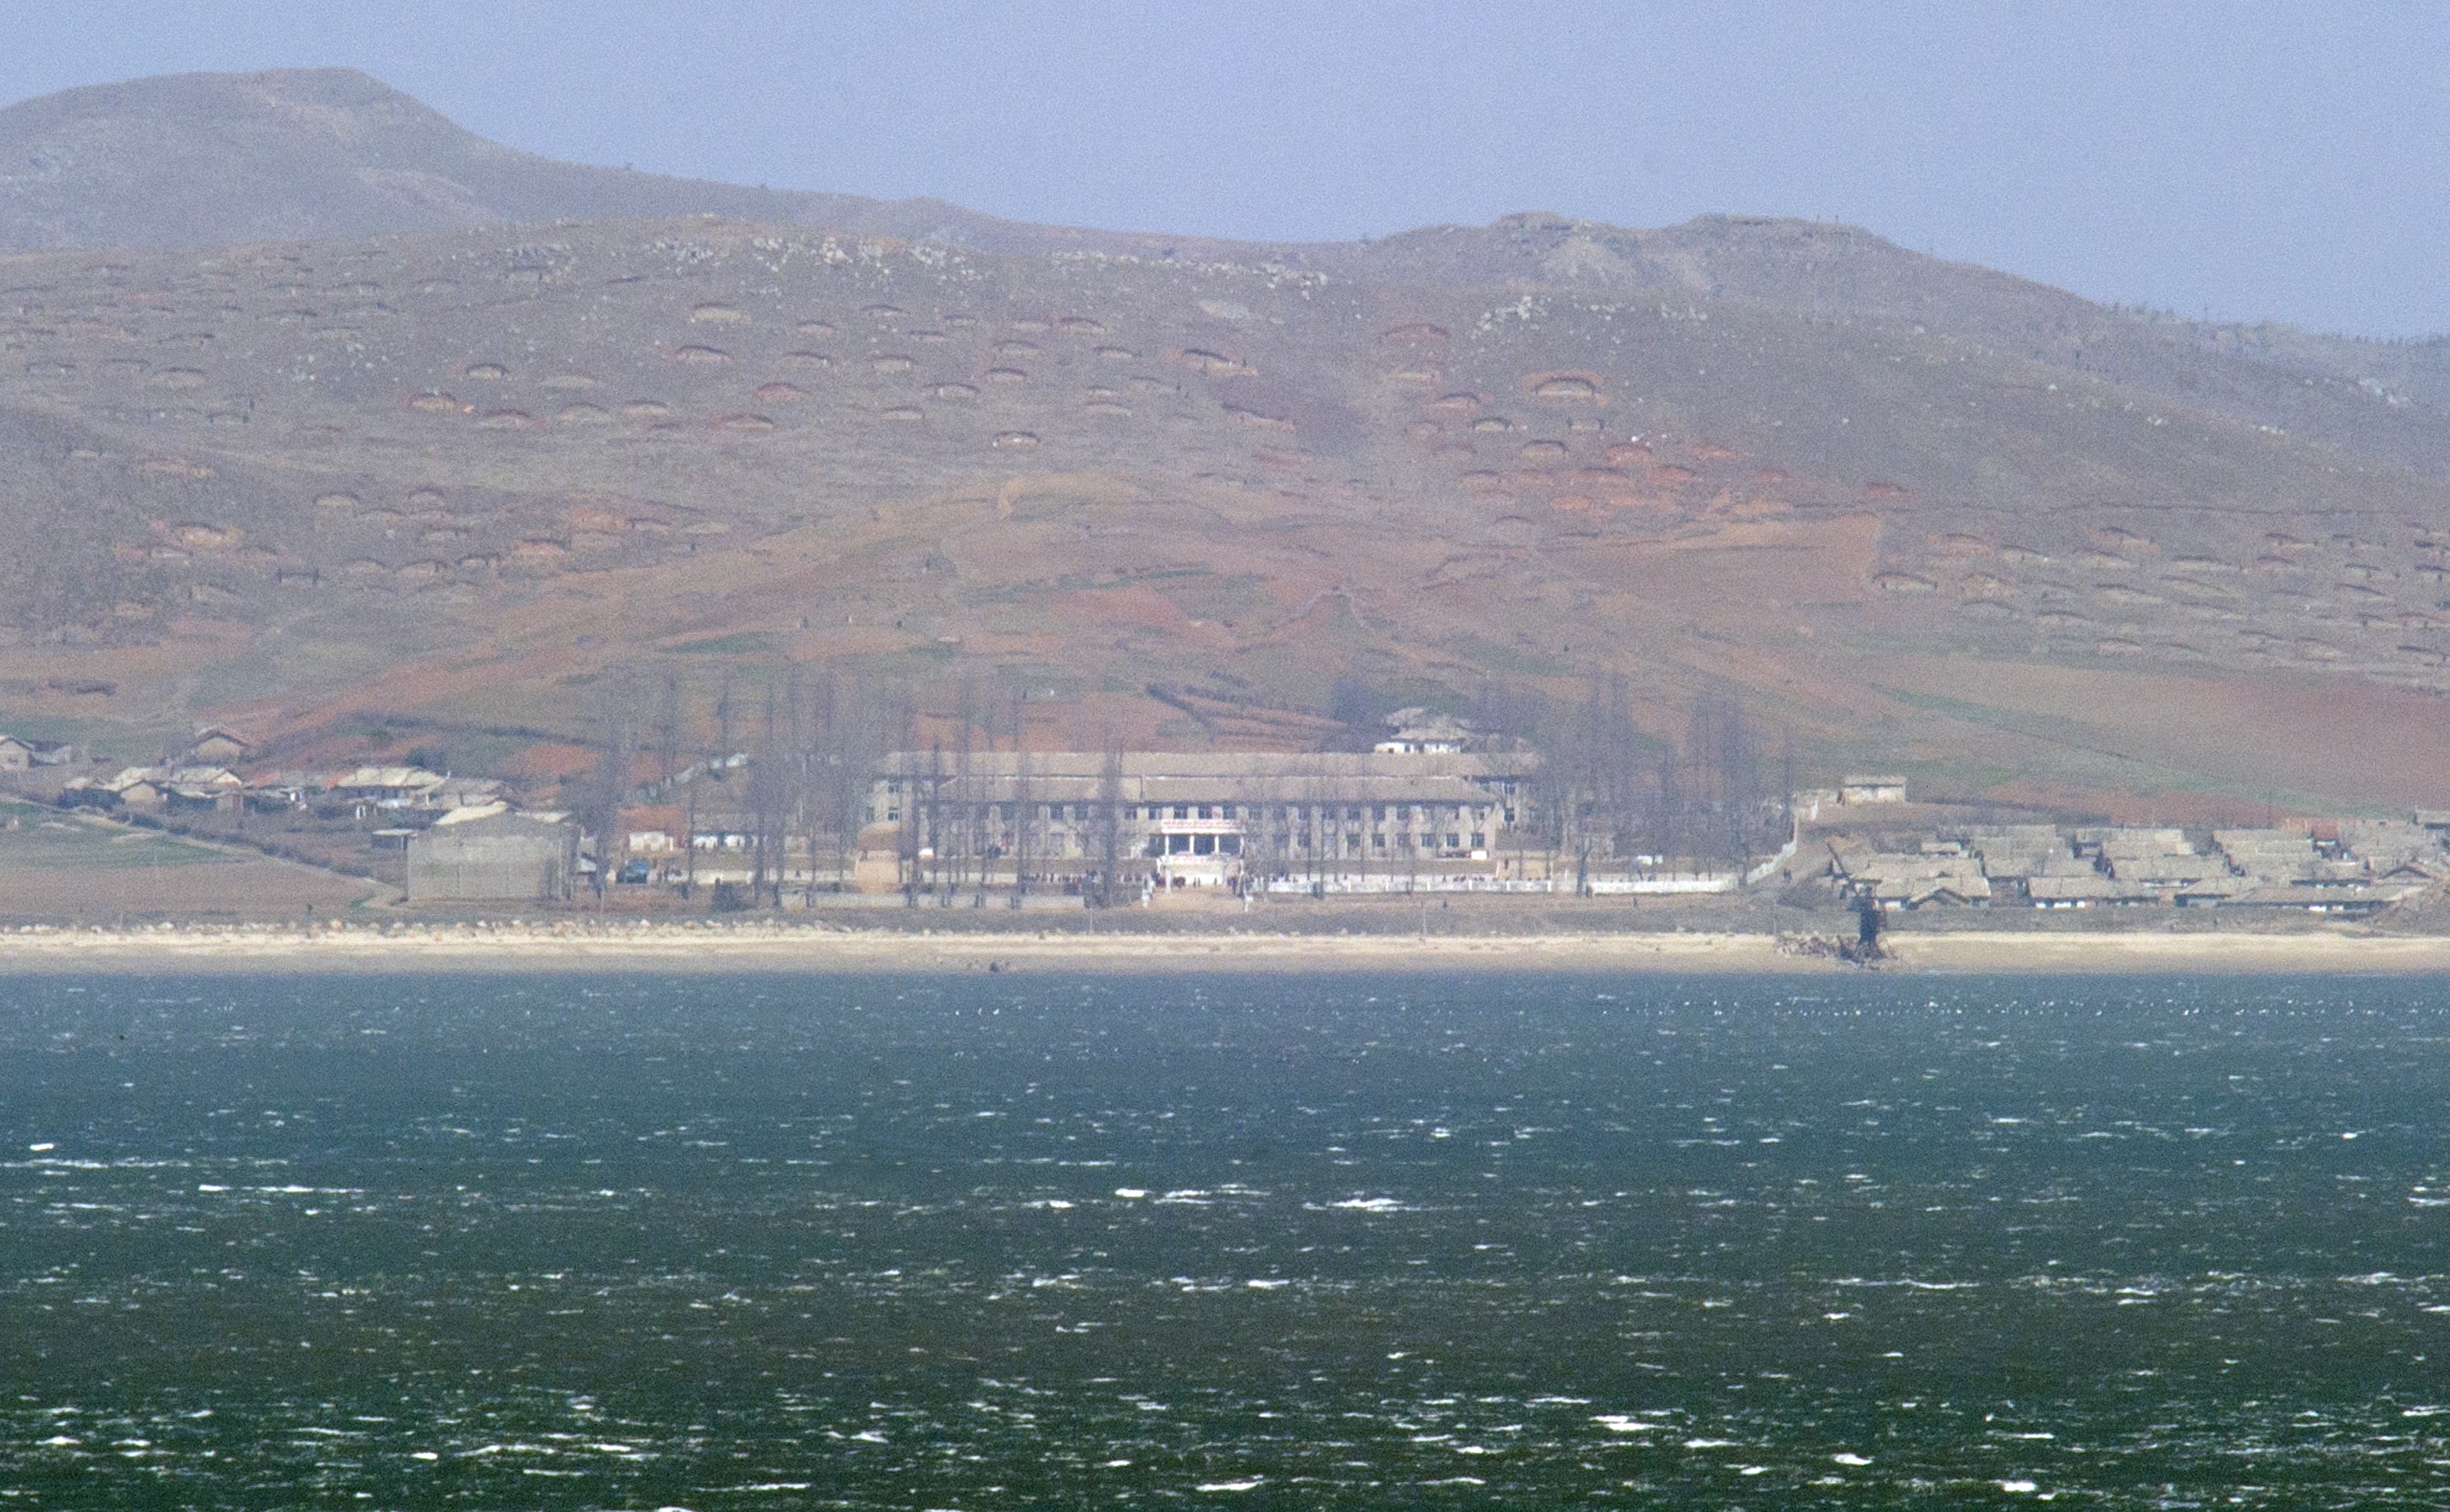 The seafront of North Korea's west coast is seen from the South Korea-controlled island of Yeonpyeong near the disputed waters of the Yellow Sea on April 14, 2013.  The Korean peninsula has been engulfed by escalating military tensions and dire threats of nuclear war ever since North Korea conducted a rocket test last December and a nuclear test in February.  AFP PHOTO / JUNG YEON-JE / AFP PHOTO / JUNG YEON-JE